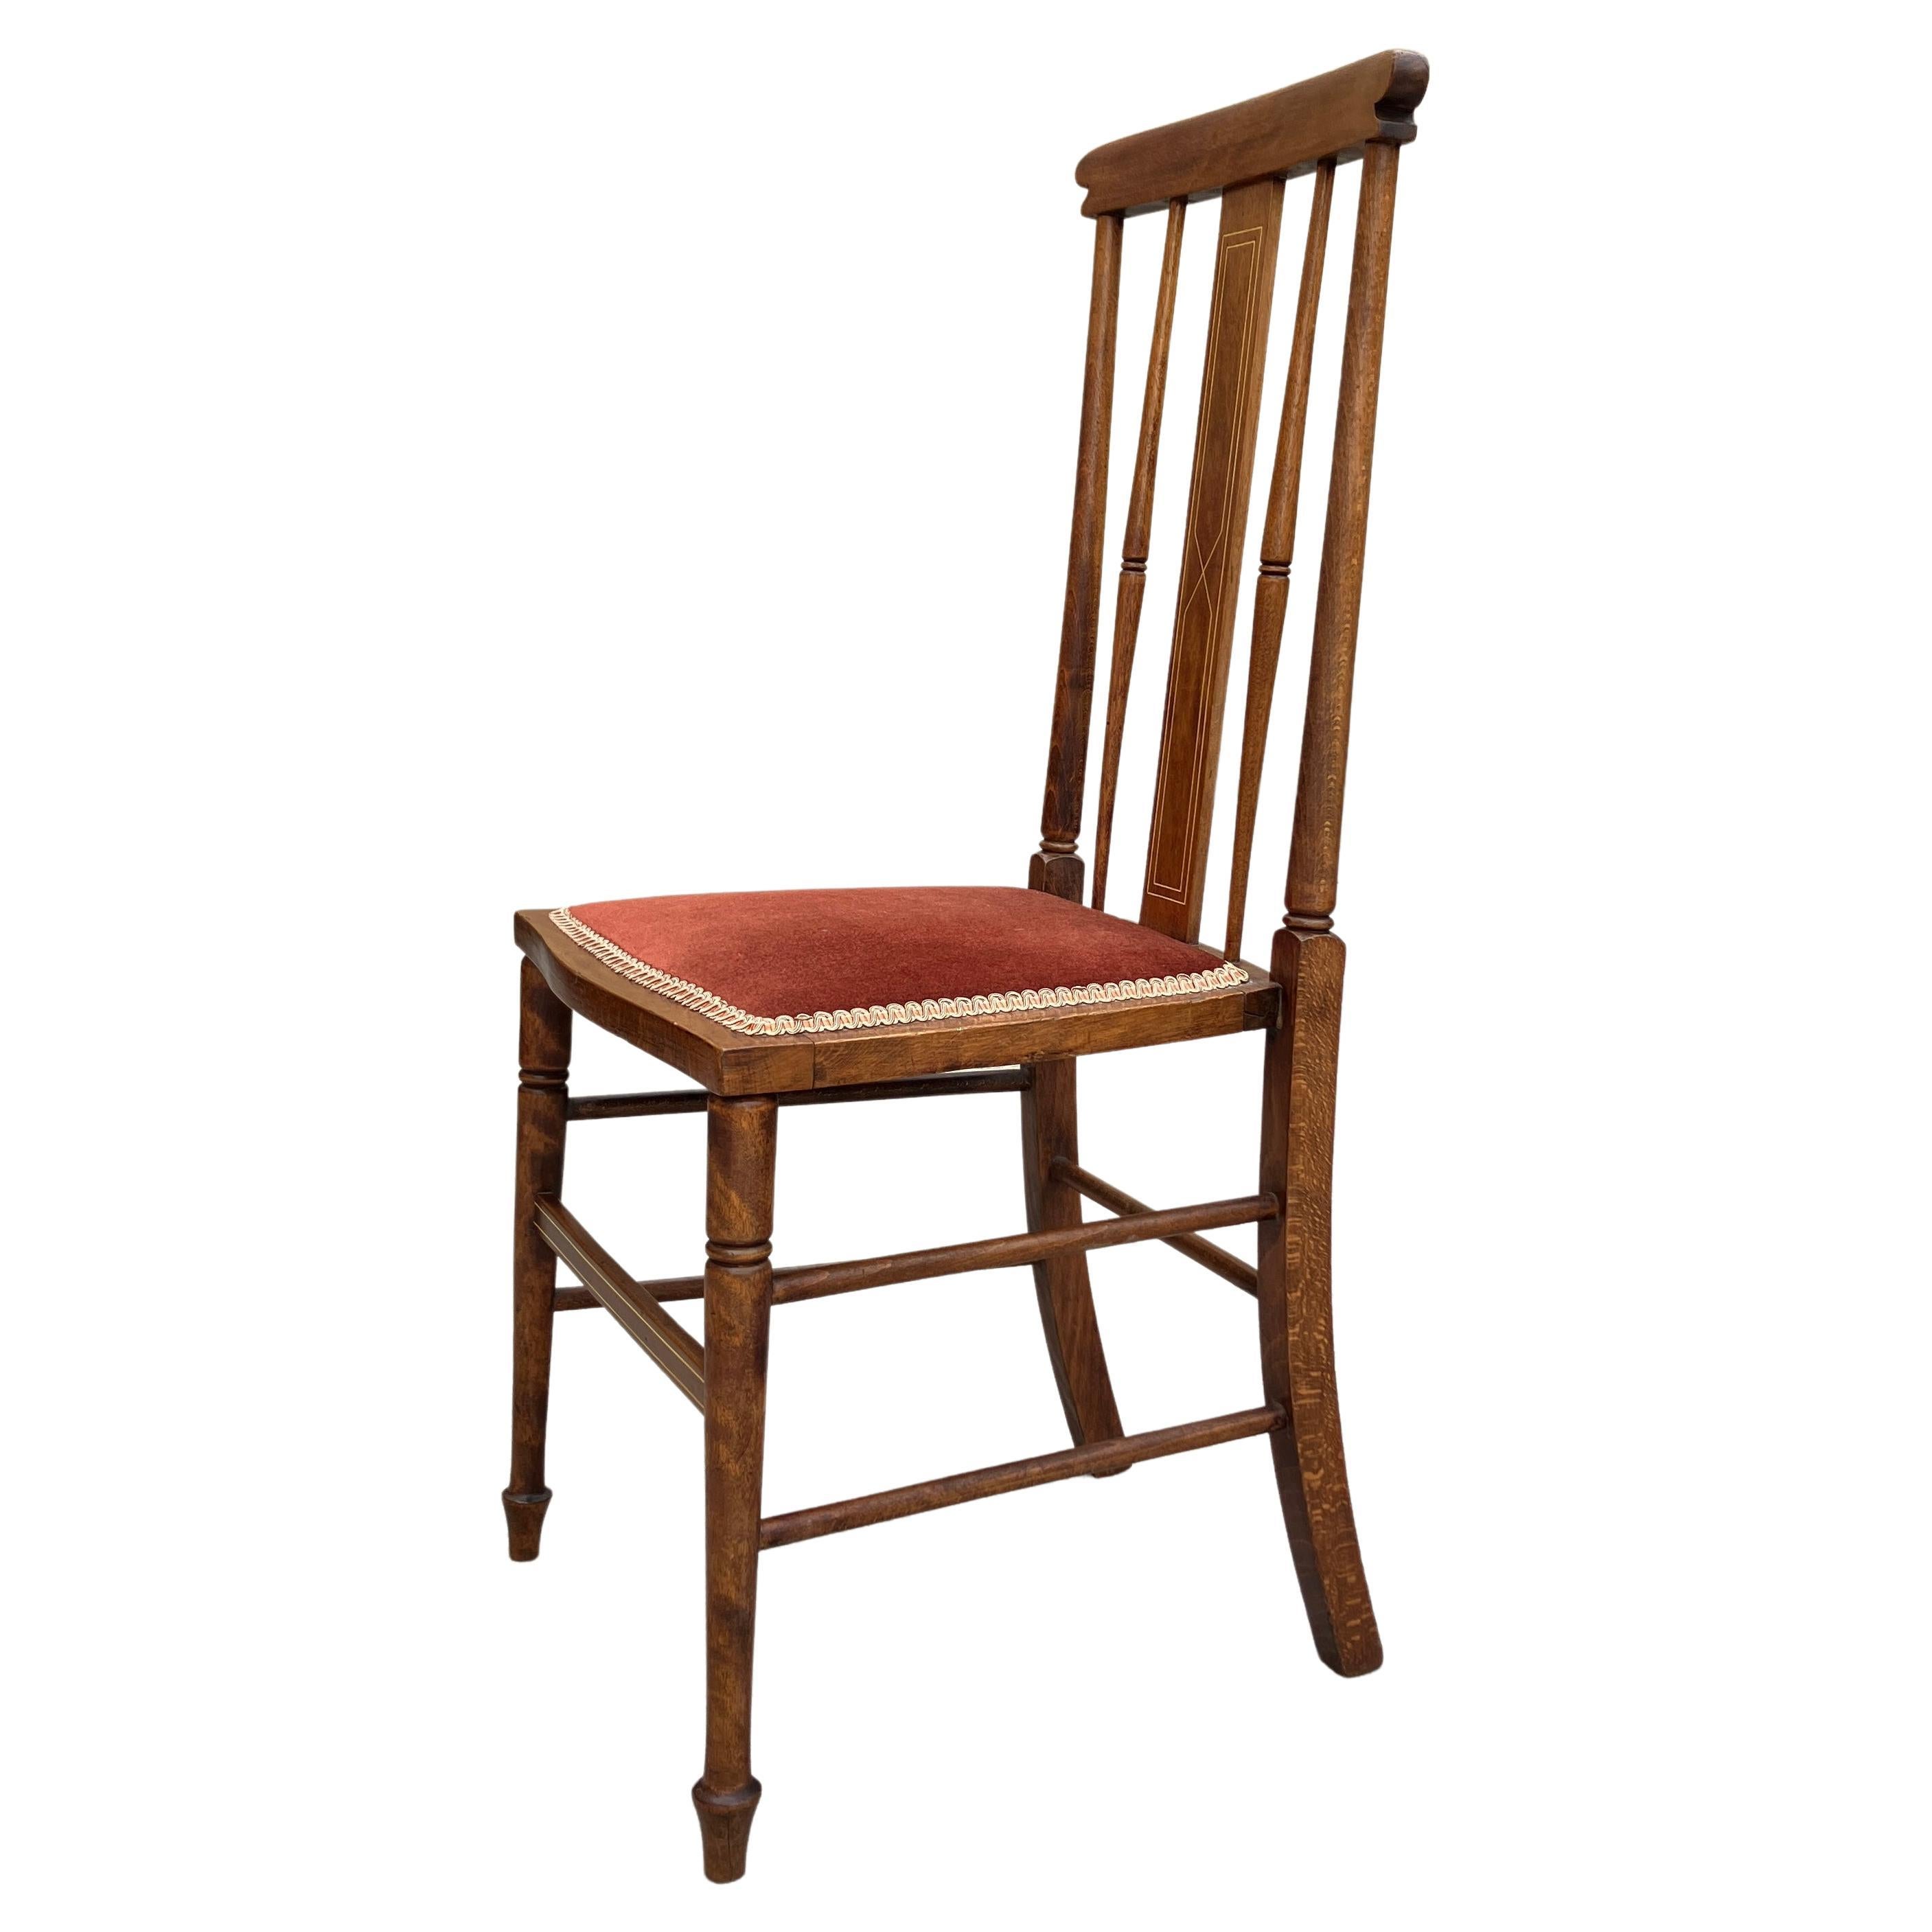 An absolutely stunning Arts & Crafts spindle back chair from the early 1900s. Made in England. The chair has delicate legs and shaped spindles on the decorative backrest. The back of the chair is tall and straight and has elegant inlay details. The